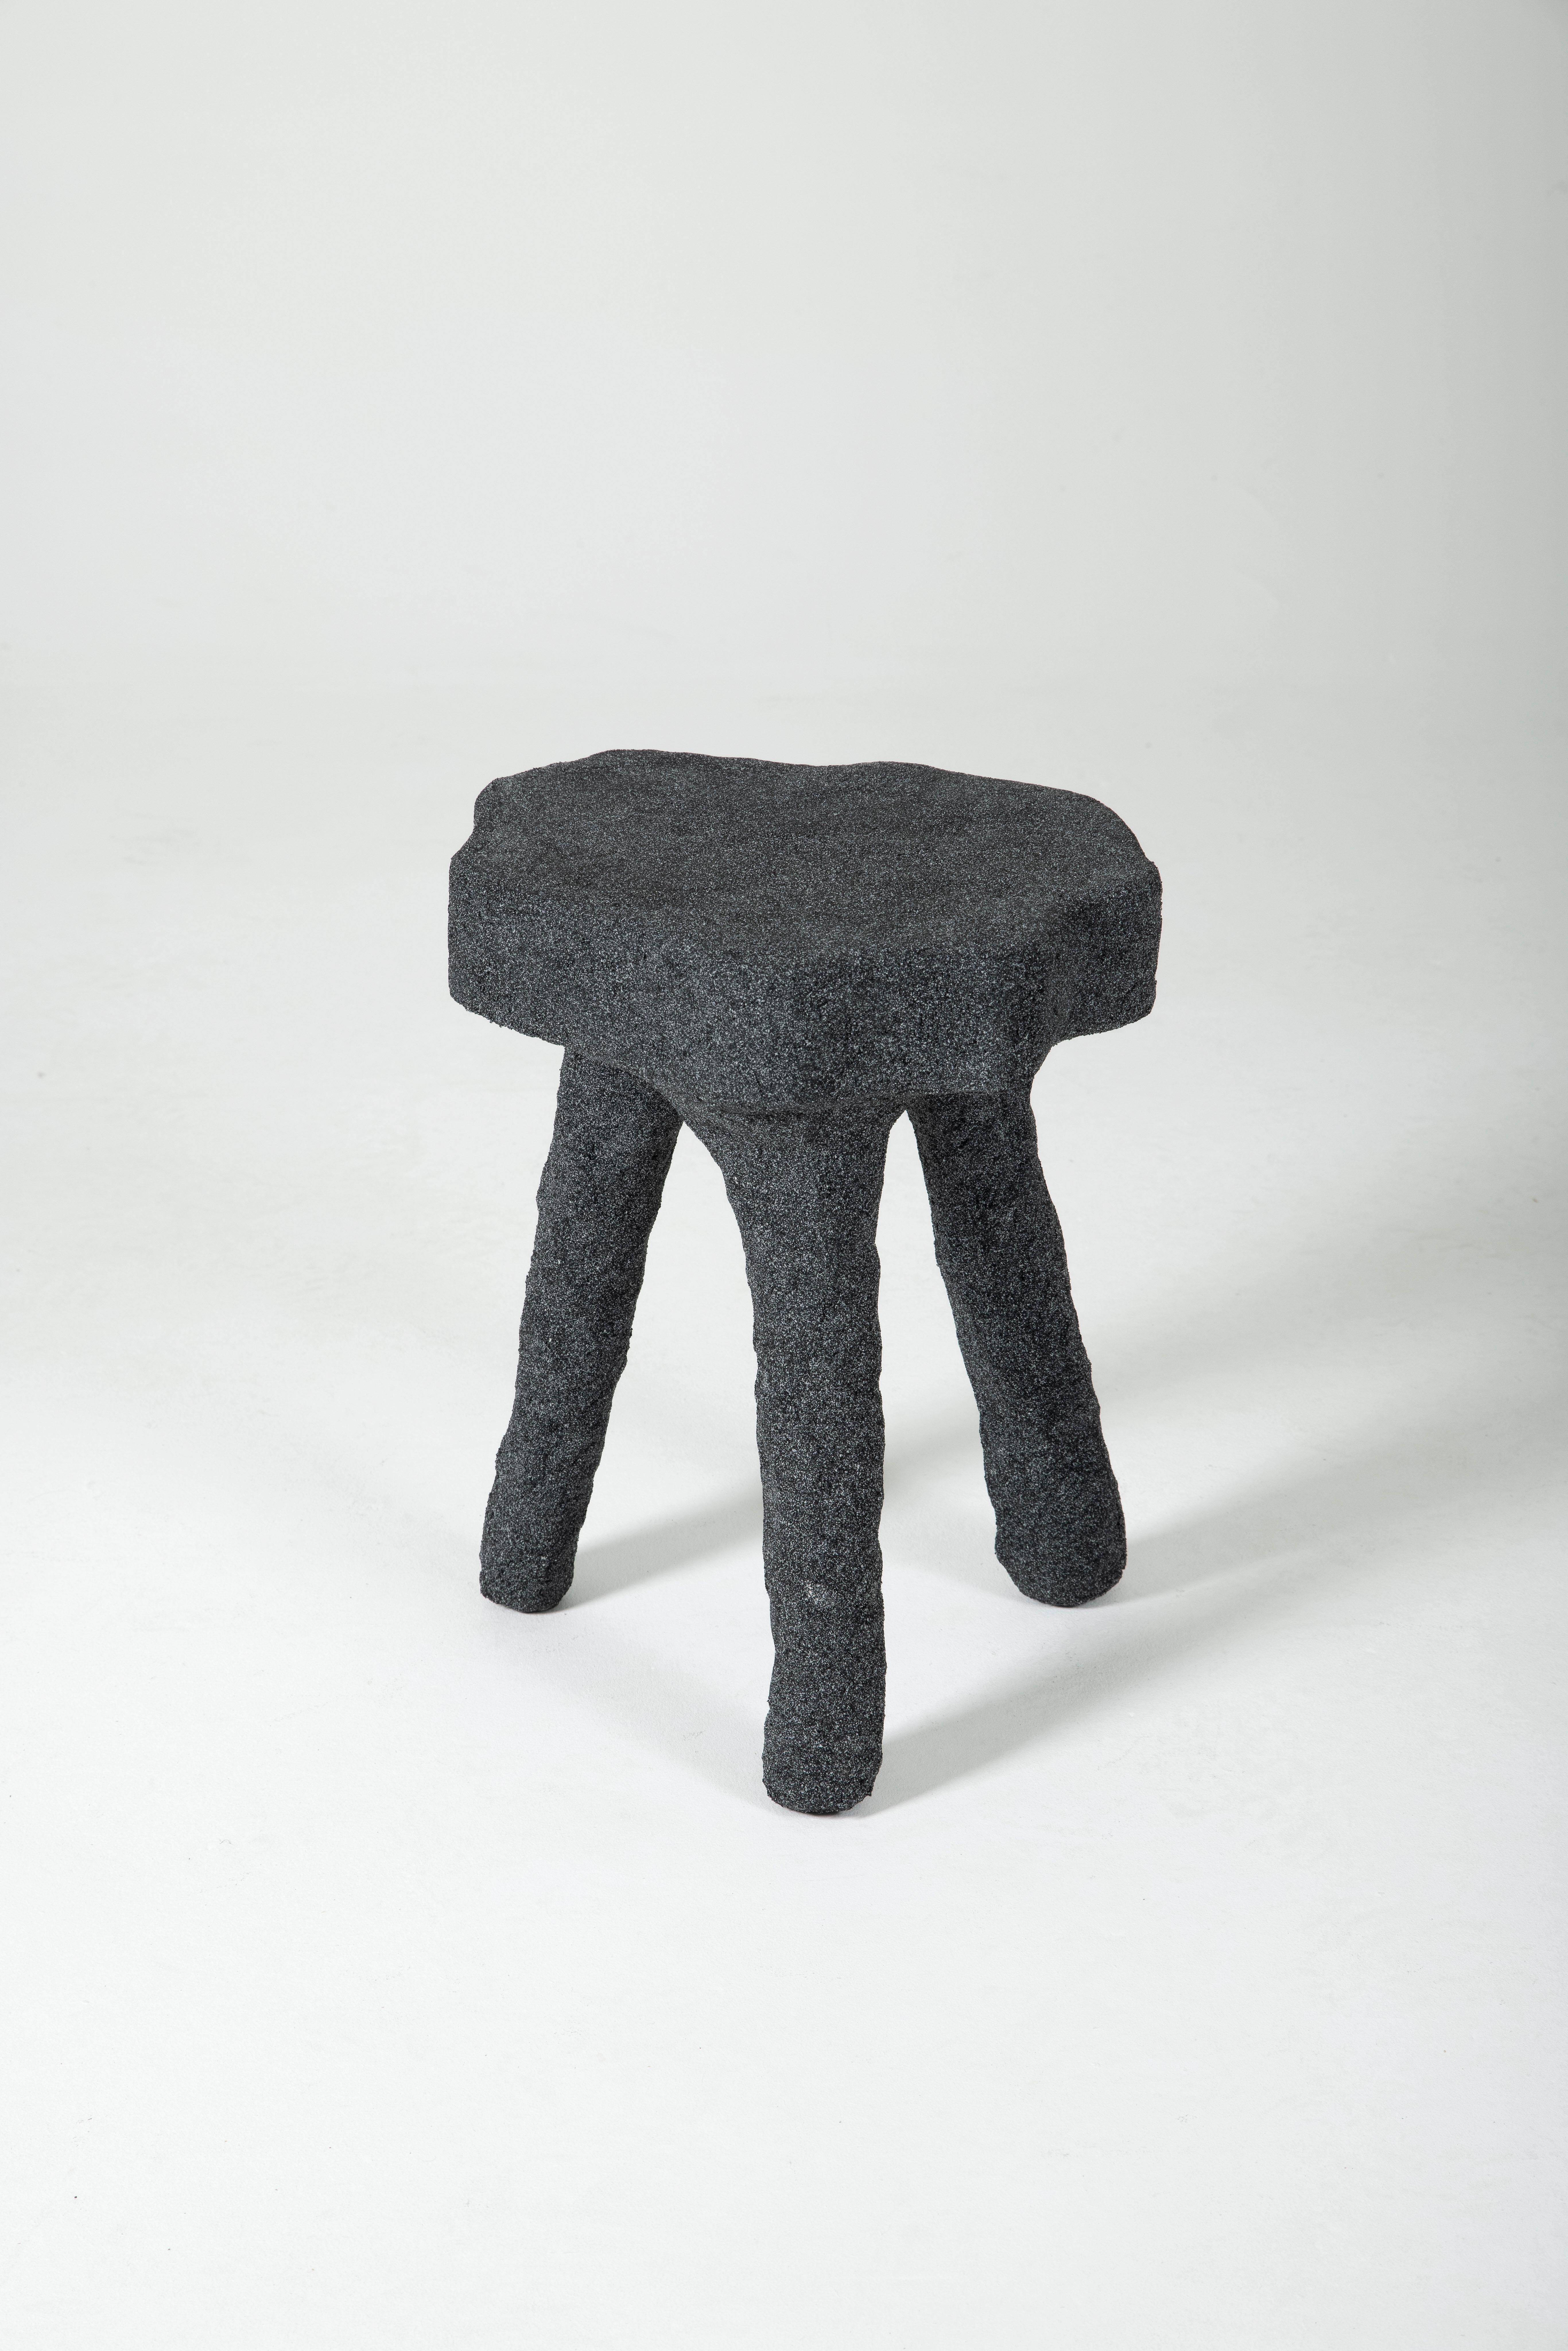 Pedestal table in plaster and black sand by Paul Hardy. Composed of 3 legs and asymmetrical top. Contemporary edition.